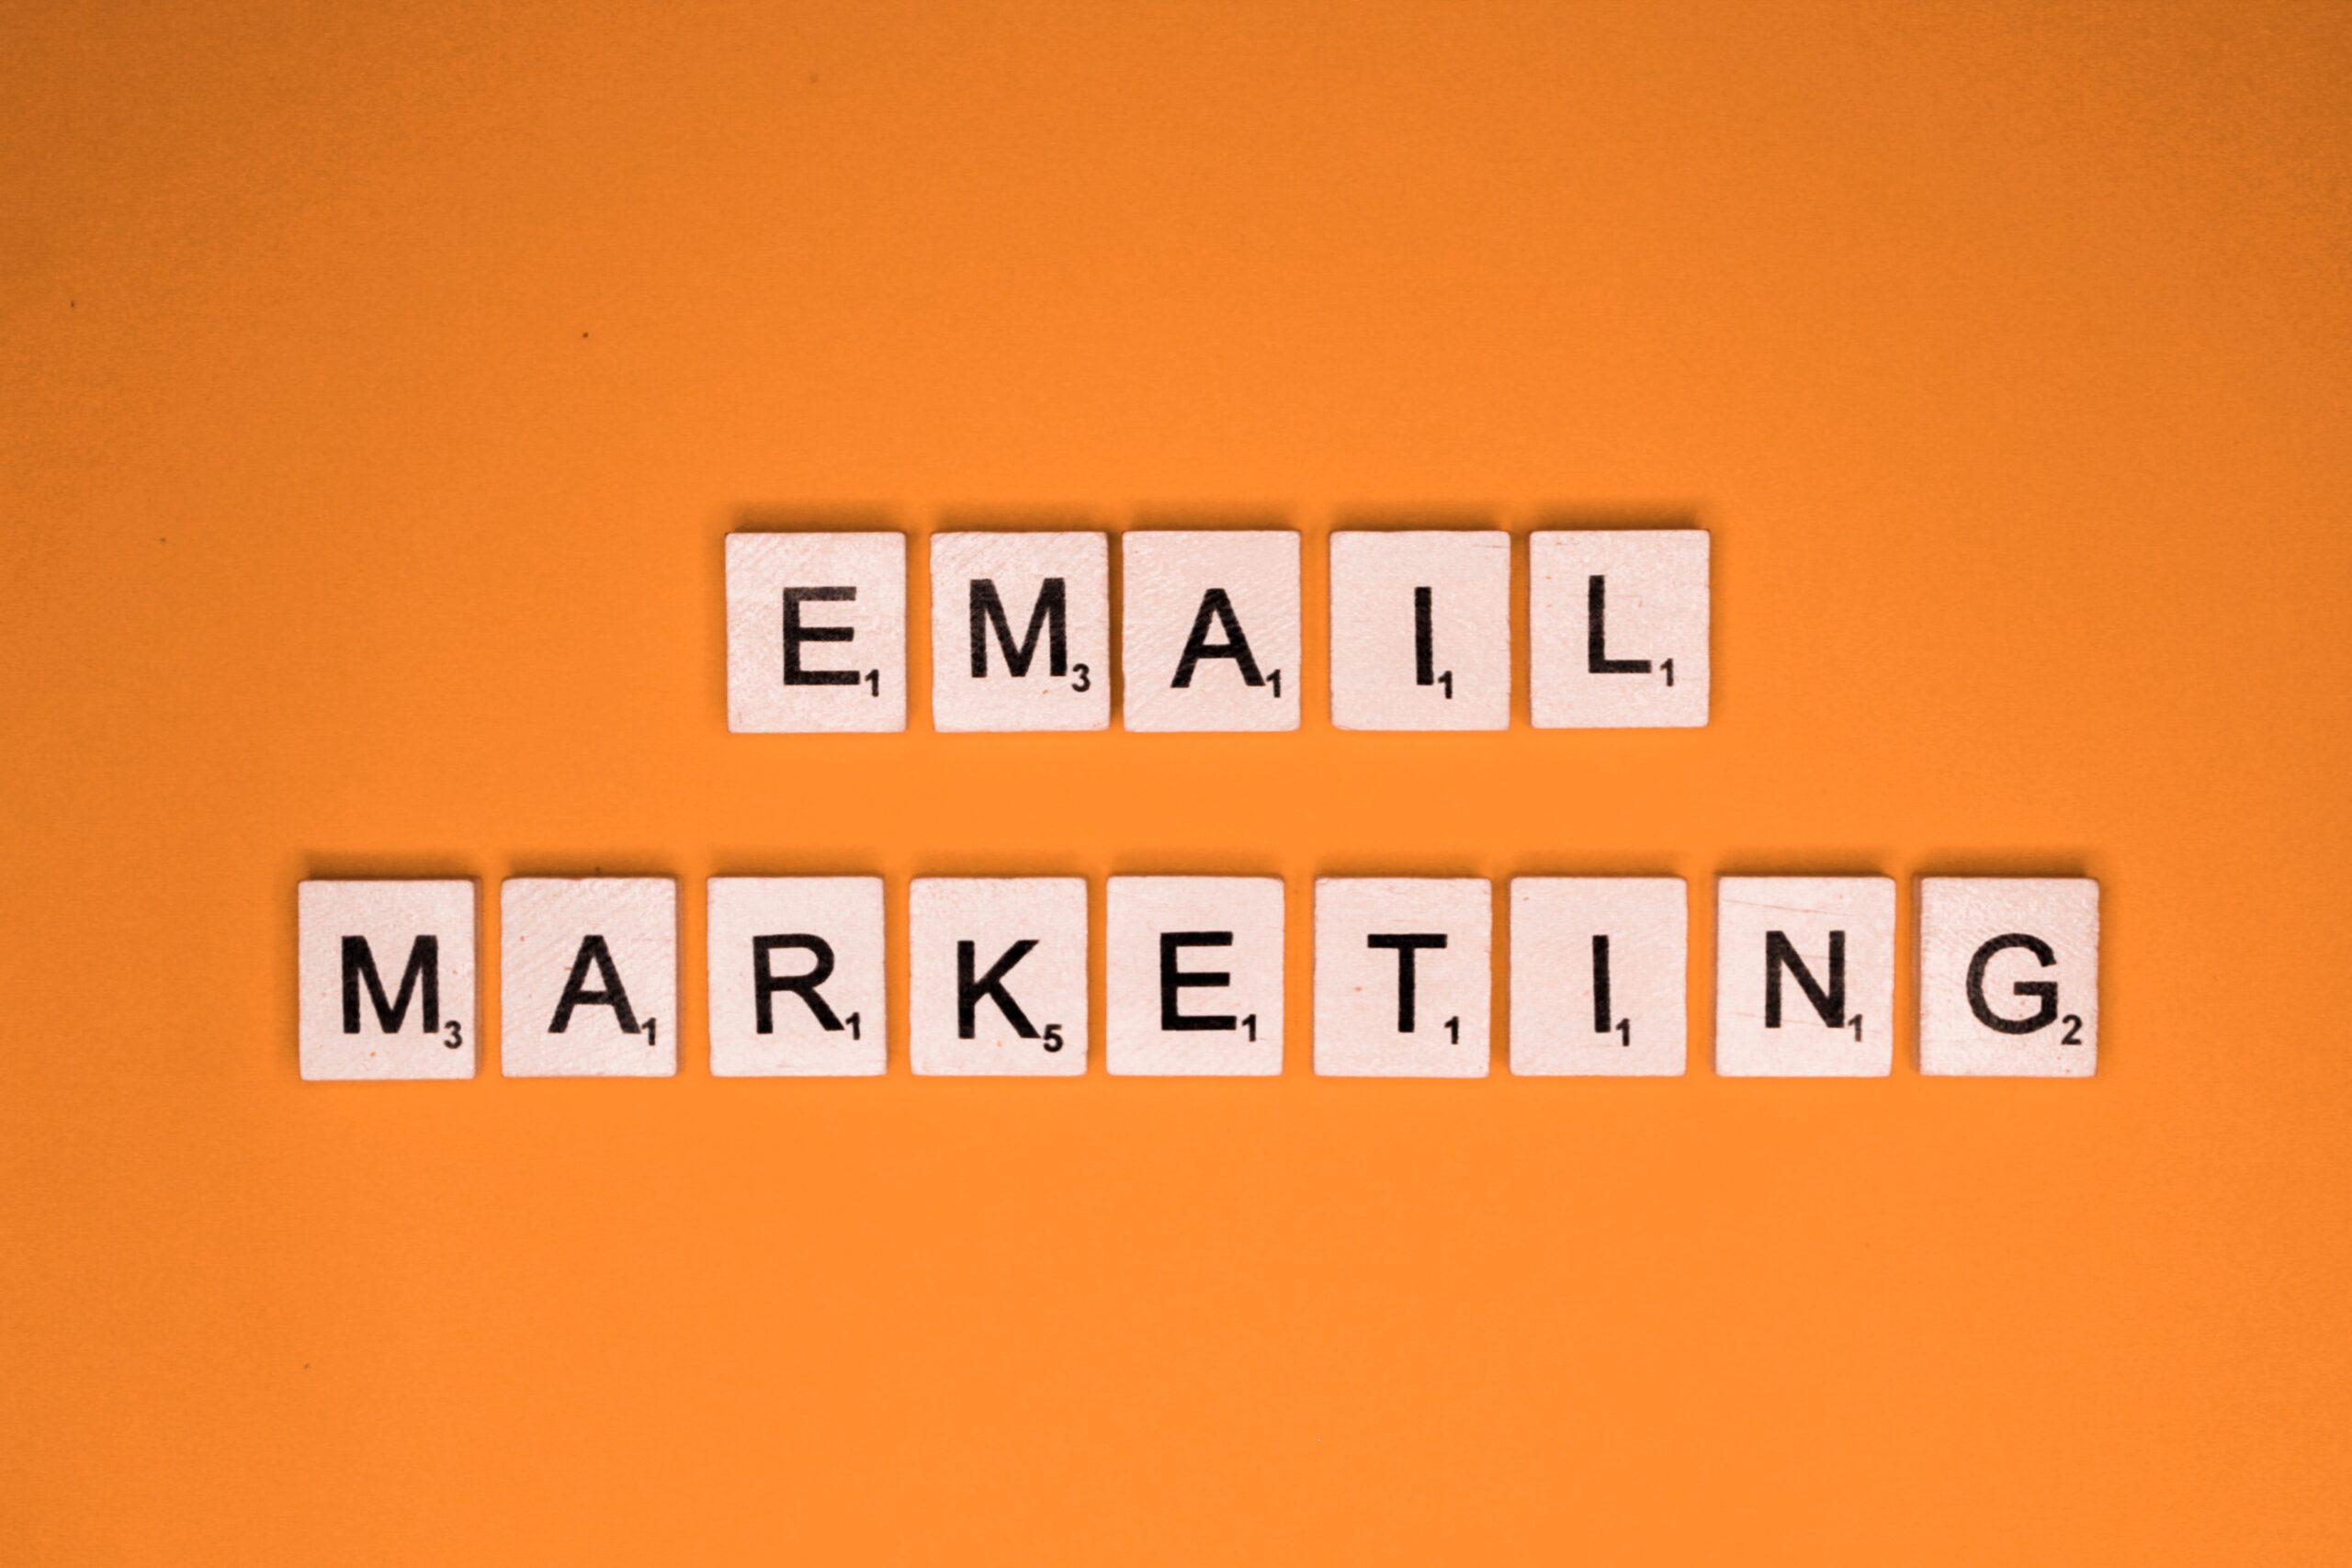 Email Marketing scrabble letters for digital marketing